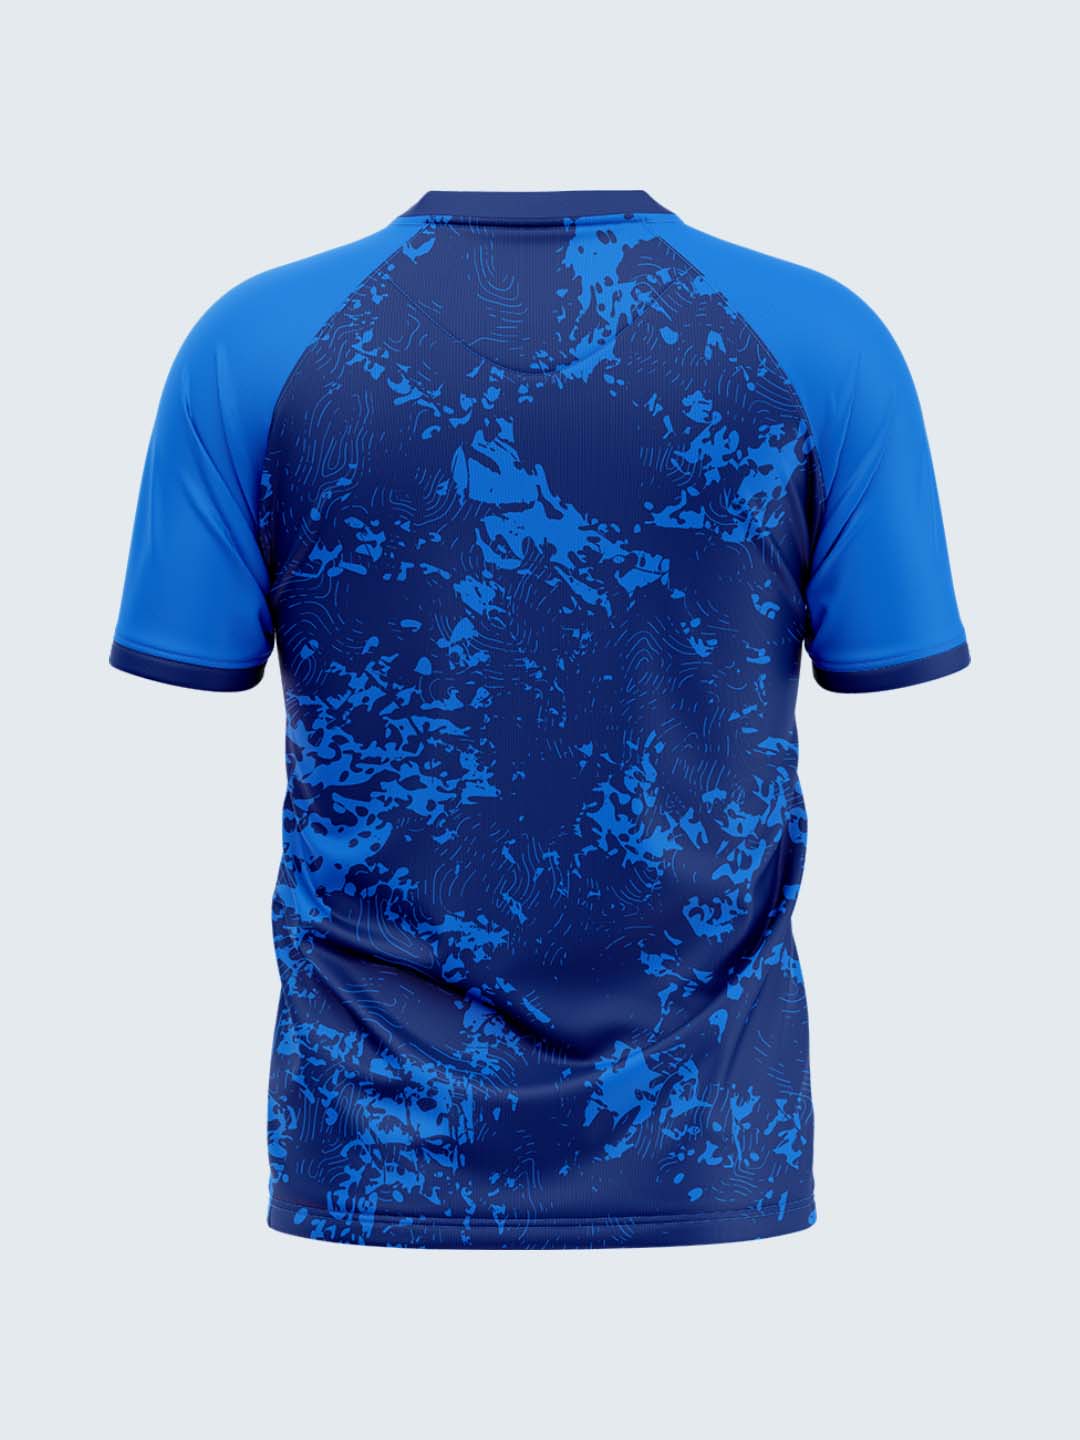 Customise Blue Rugby Jersey - 2074BL - Front